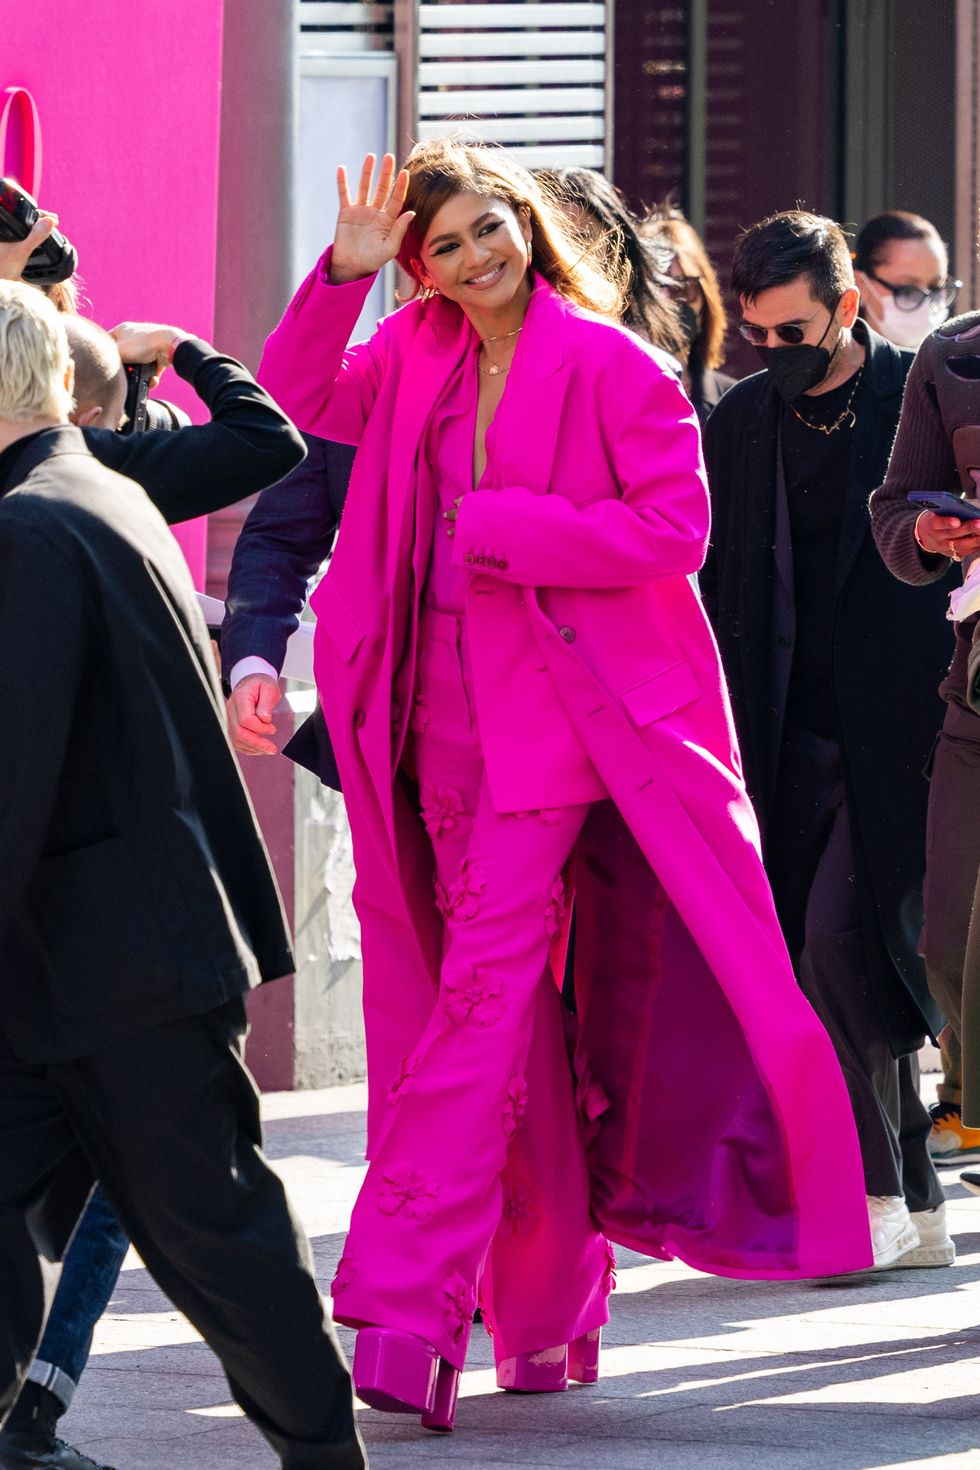 Inspired by the Celebrity Pink Suit Trend - Sydne Style